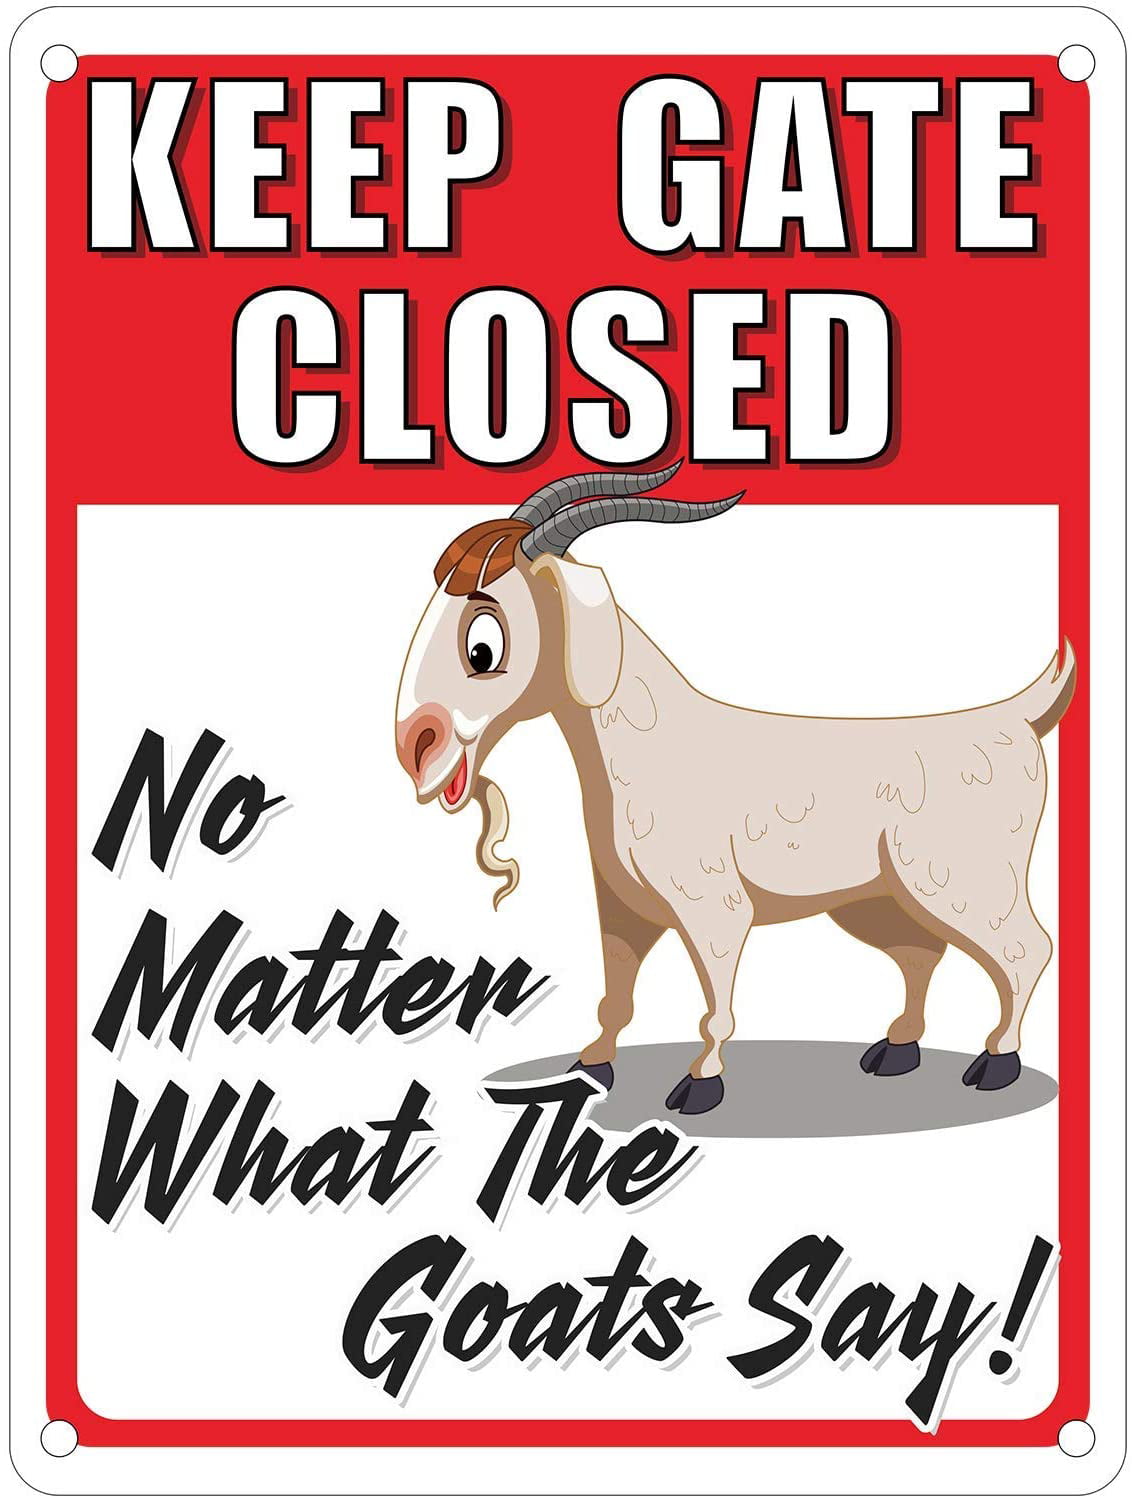 Keep The Gate Closed No Matter What The Goats Say Warning Metal Tin Sign Goats Outdoor Funny Novelty Caution Goats Farm House Barn Sign for Fence Wall Gate 8x12INCH…